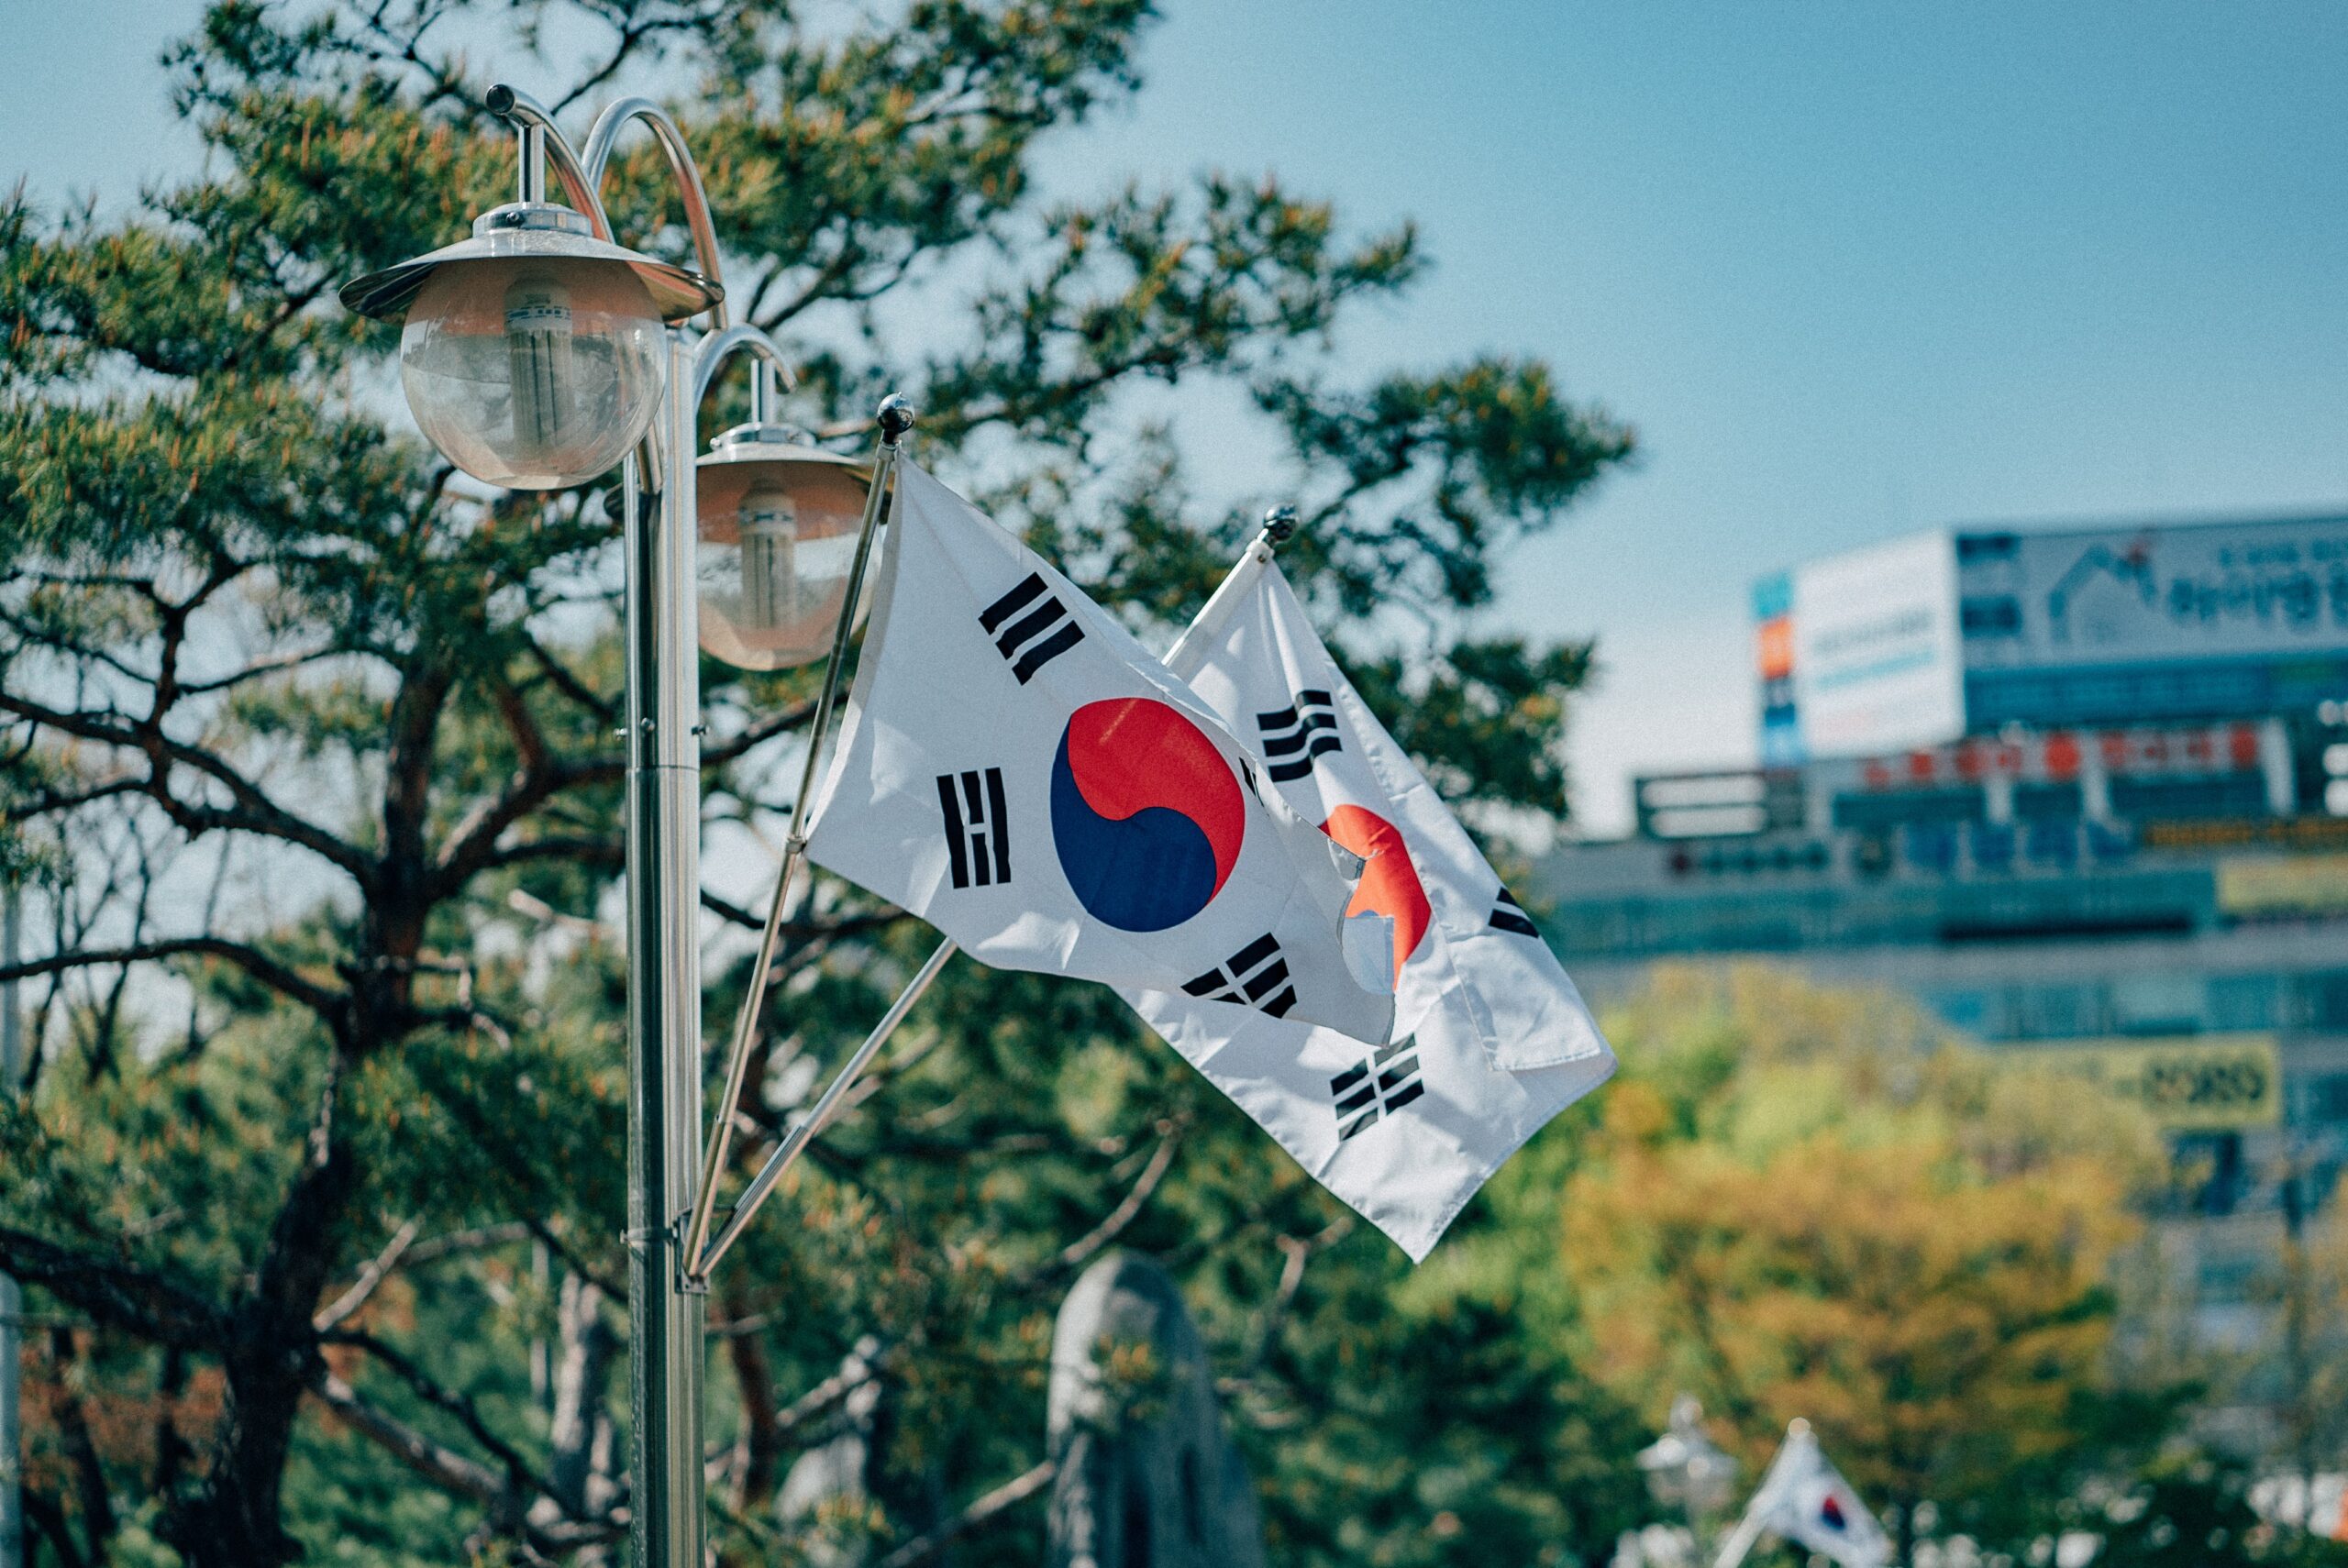 A colour photograph of two South Korean flags on a lamp post in front of trees, buildings and a blue sky.